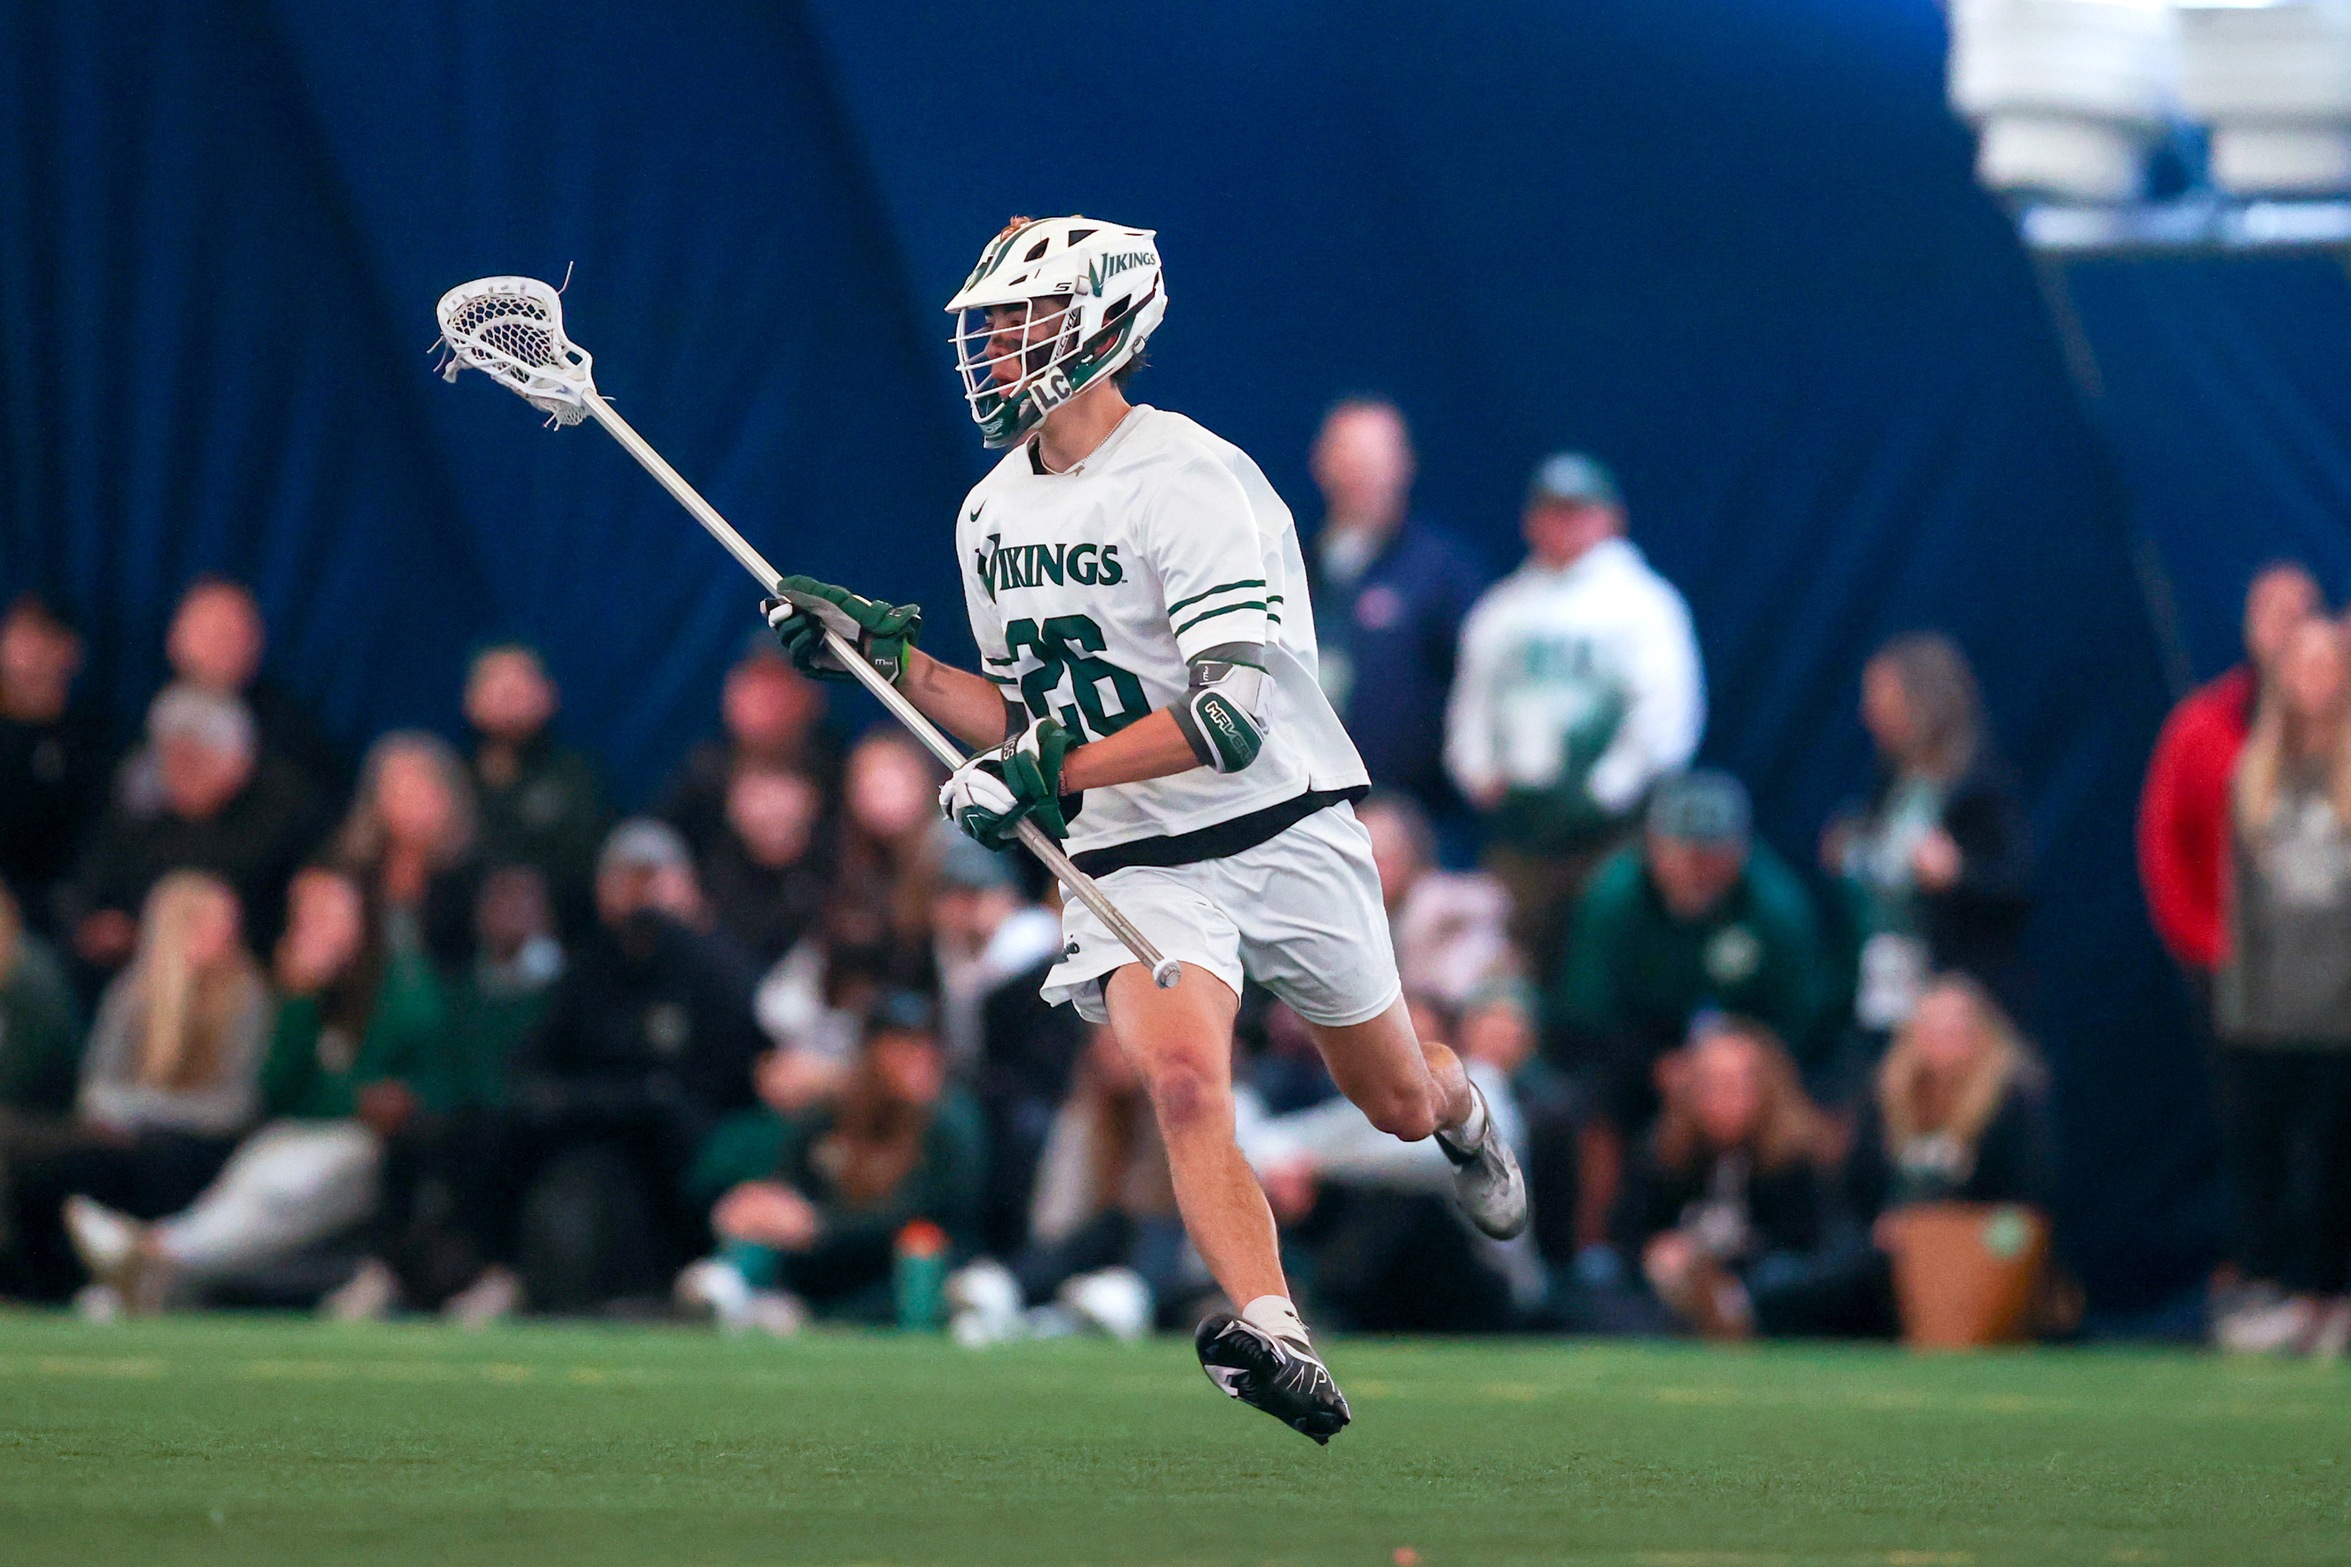 Cleveland State Lacrosse Takes on Detroit Mercy Under the Lights